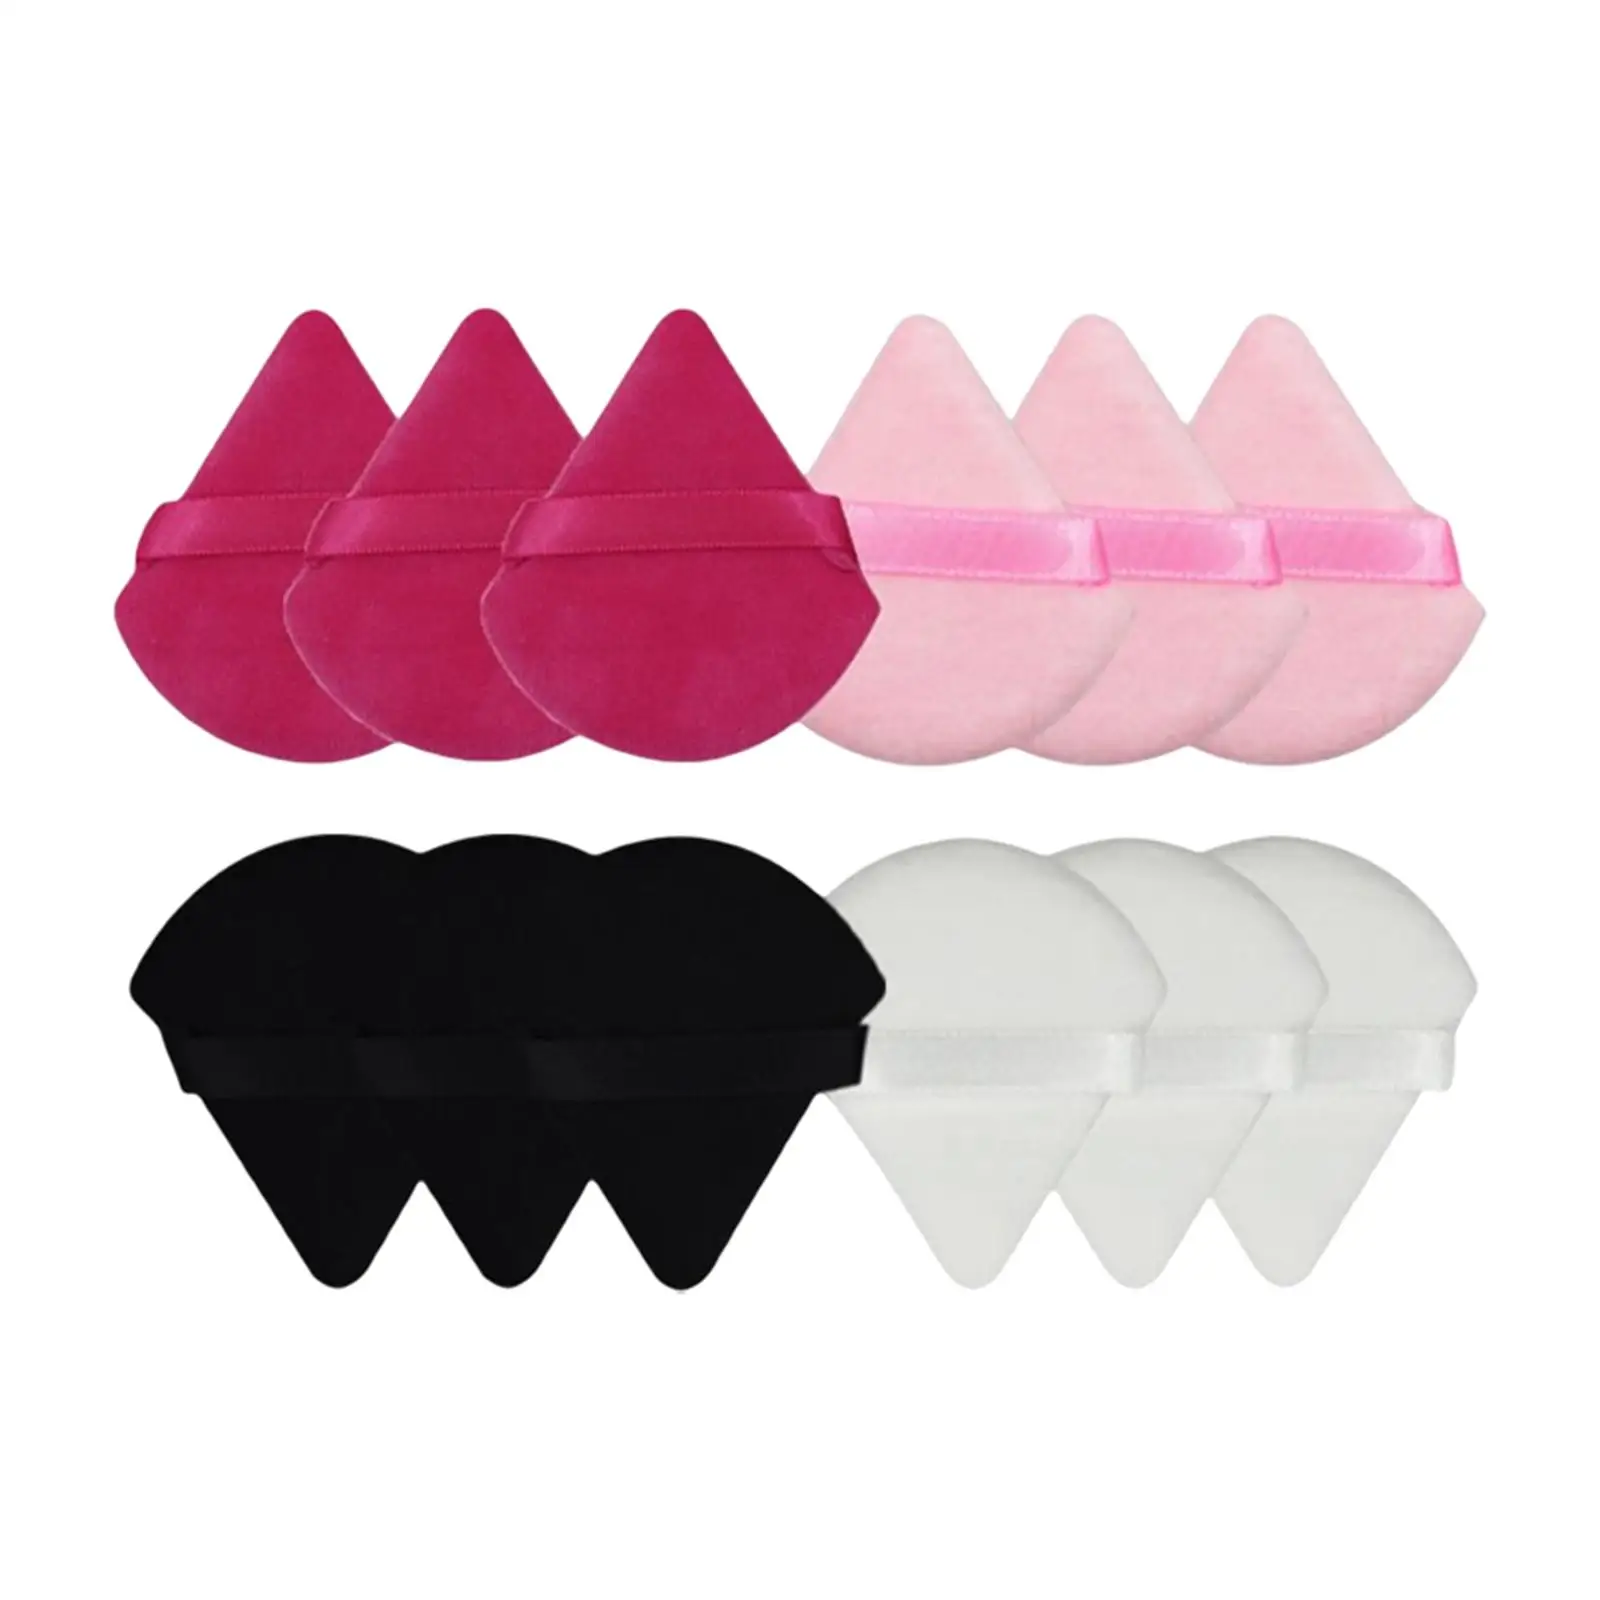 12x Triangle Powder Beauty Makeup Tool Pure Color Washable with Strap Makeup Puff for Loose Powder Body Powder Eye Shadow